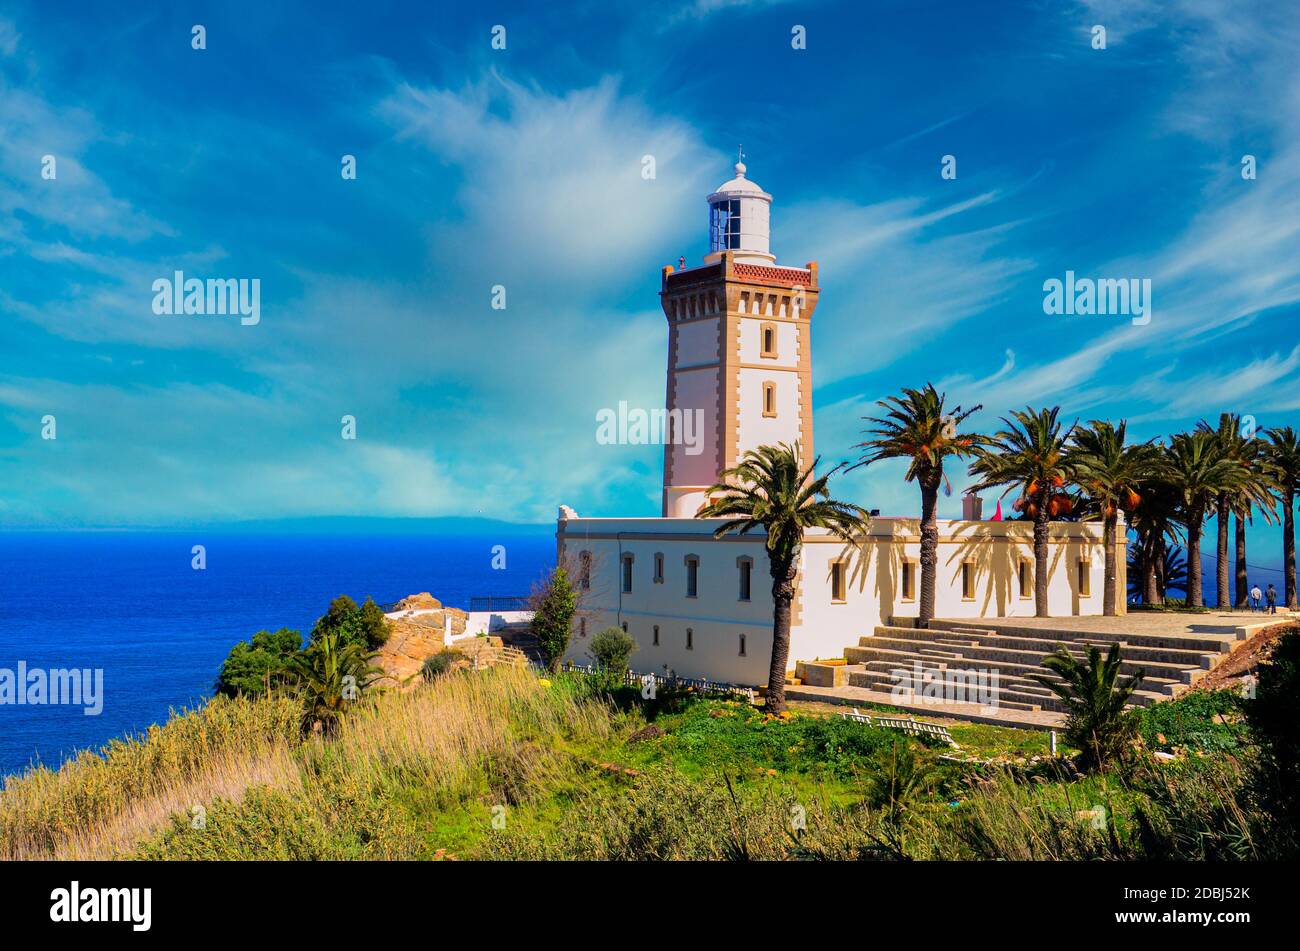 Cap Spartel, Tangier Morocco.Beautiful Lighthouse of Cap Spartel close to Tanger city and Gibraltar, Morocco. Stock Photo